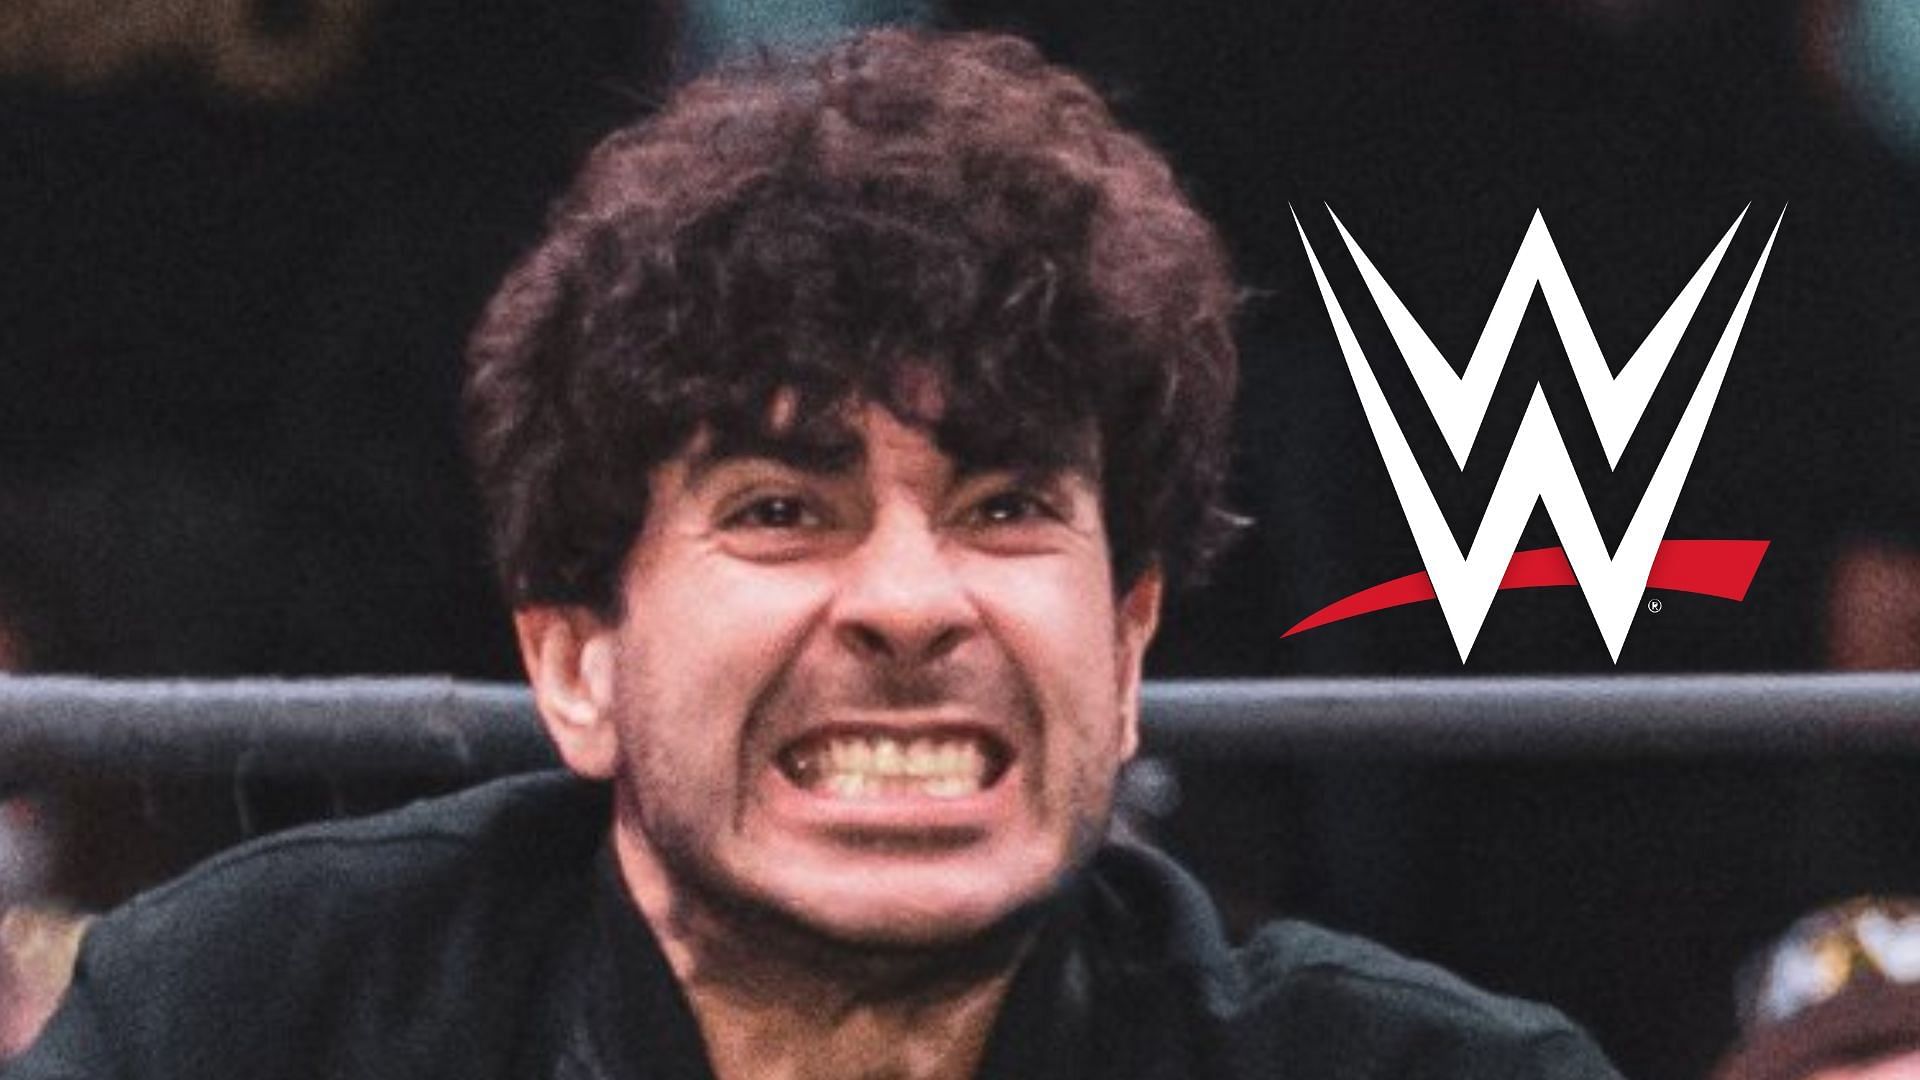 Tony Khan at an AEW event in 2022 (credit: Jay Lee Photography)